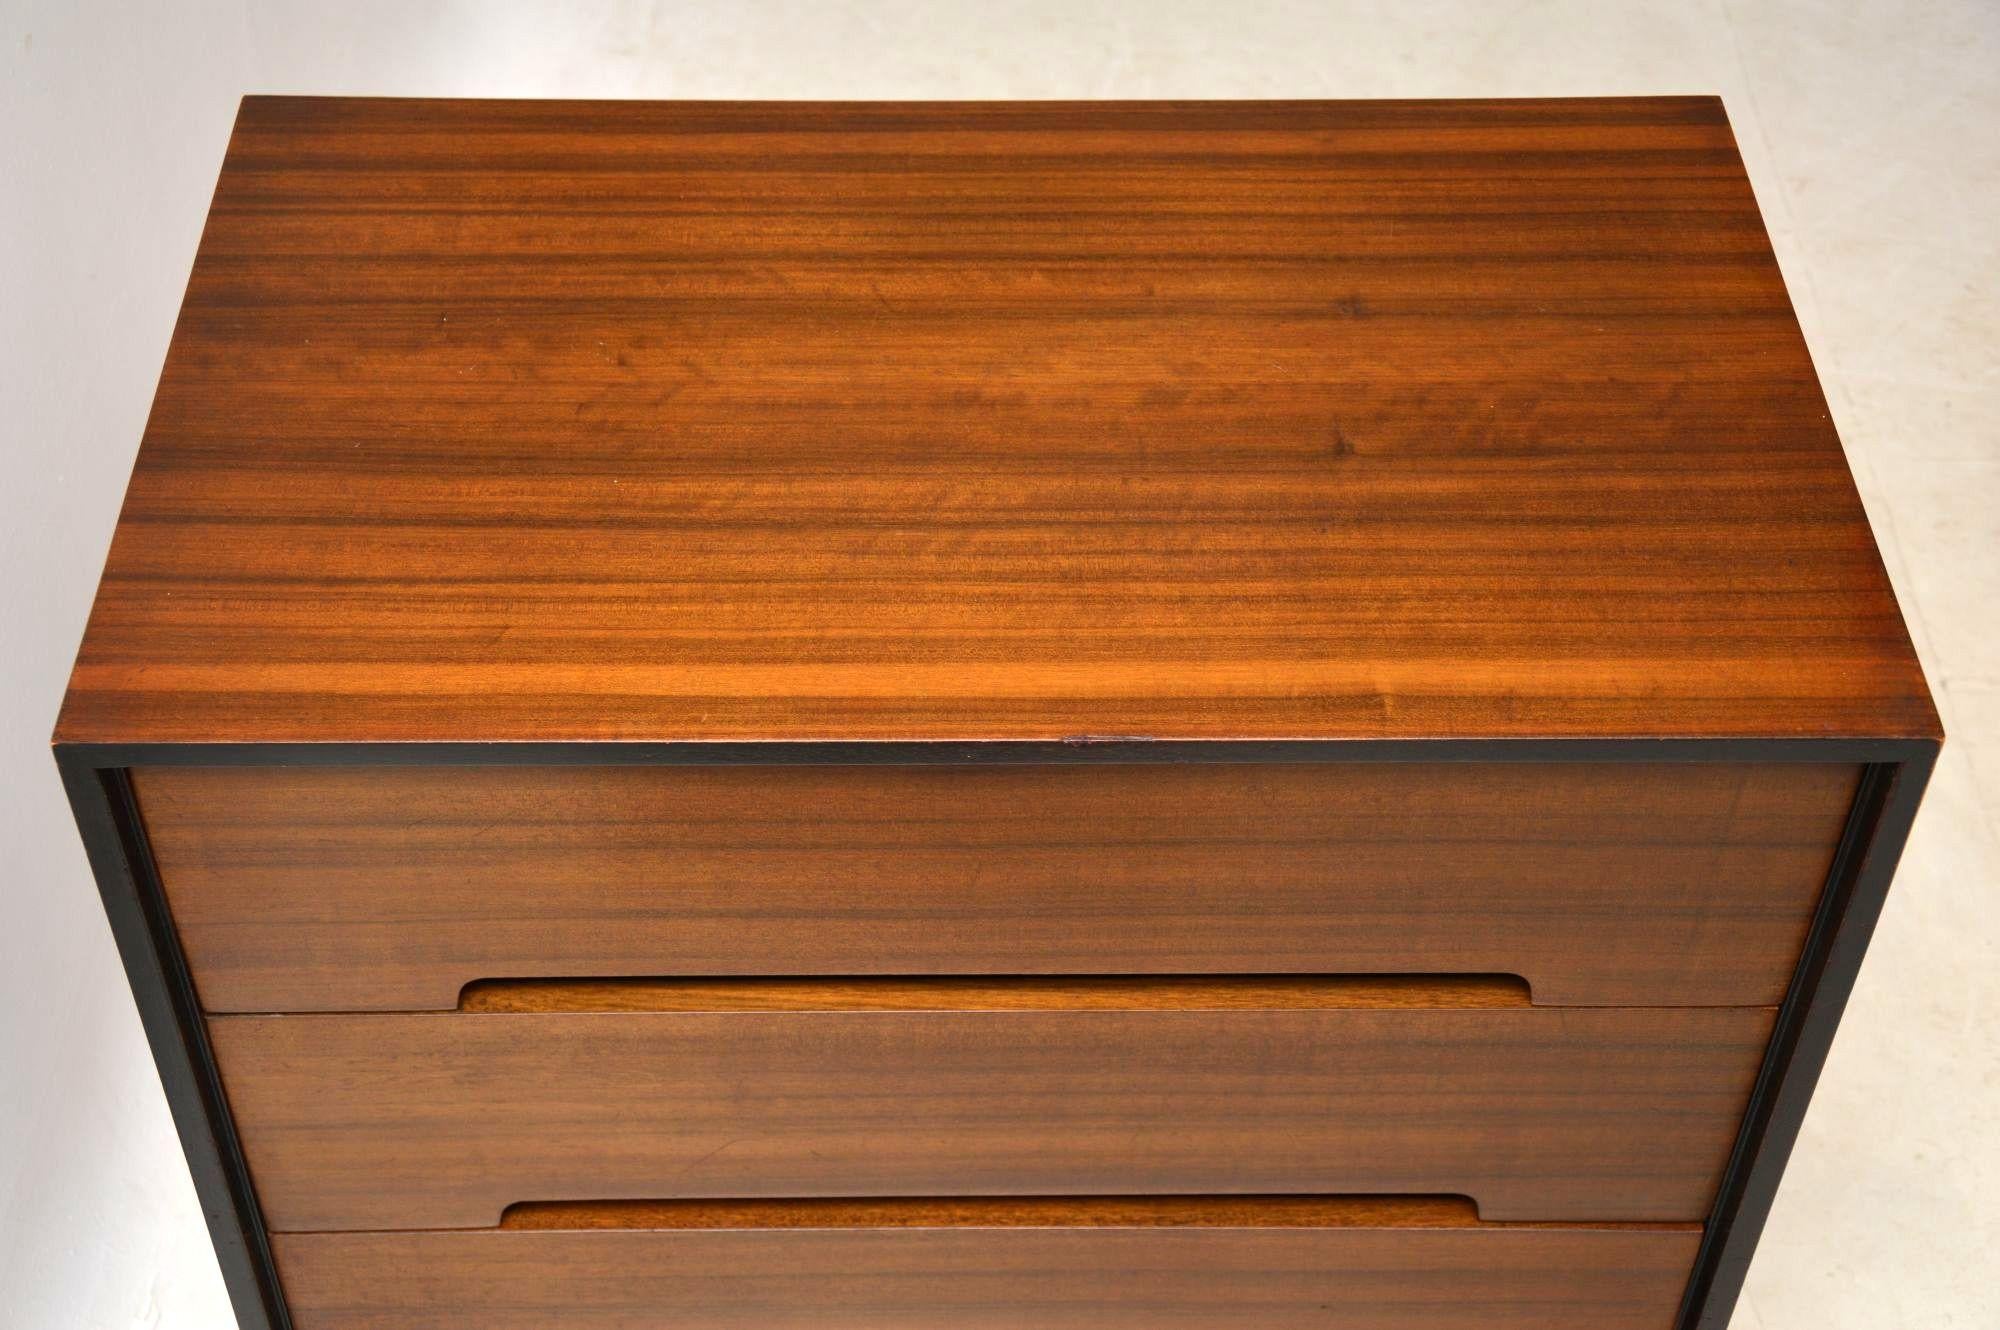 1950s Vintage Walnut Chest of Drawers by John & Sylvia Reid for Stag C Range 1